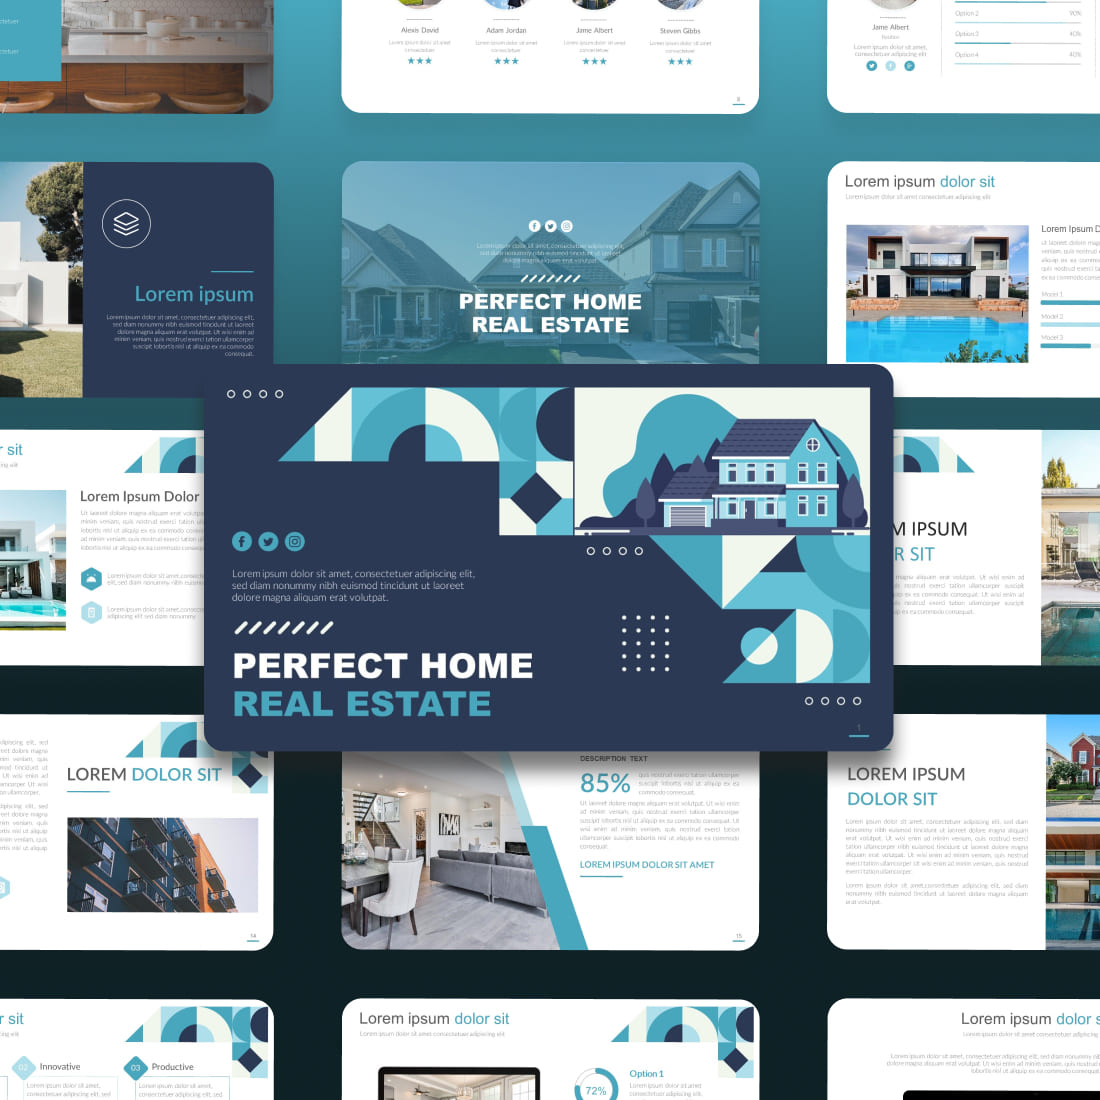 Perfect Home Real Estate Google Slides Theme cover.